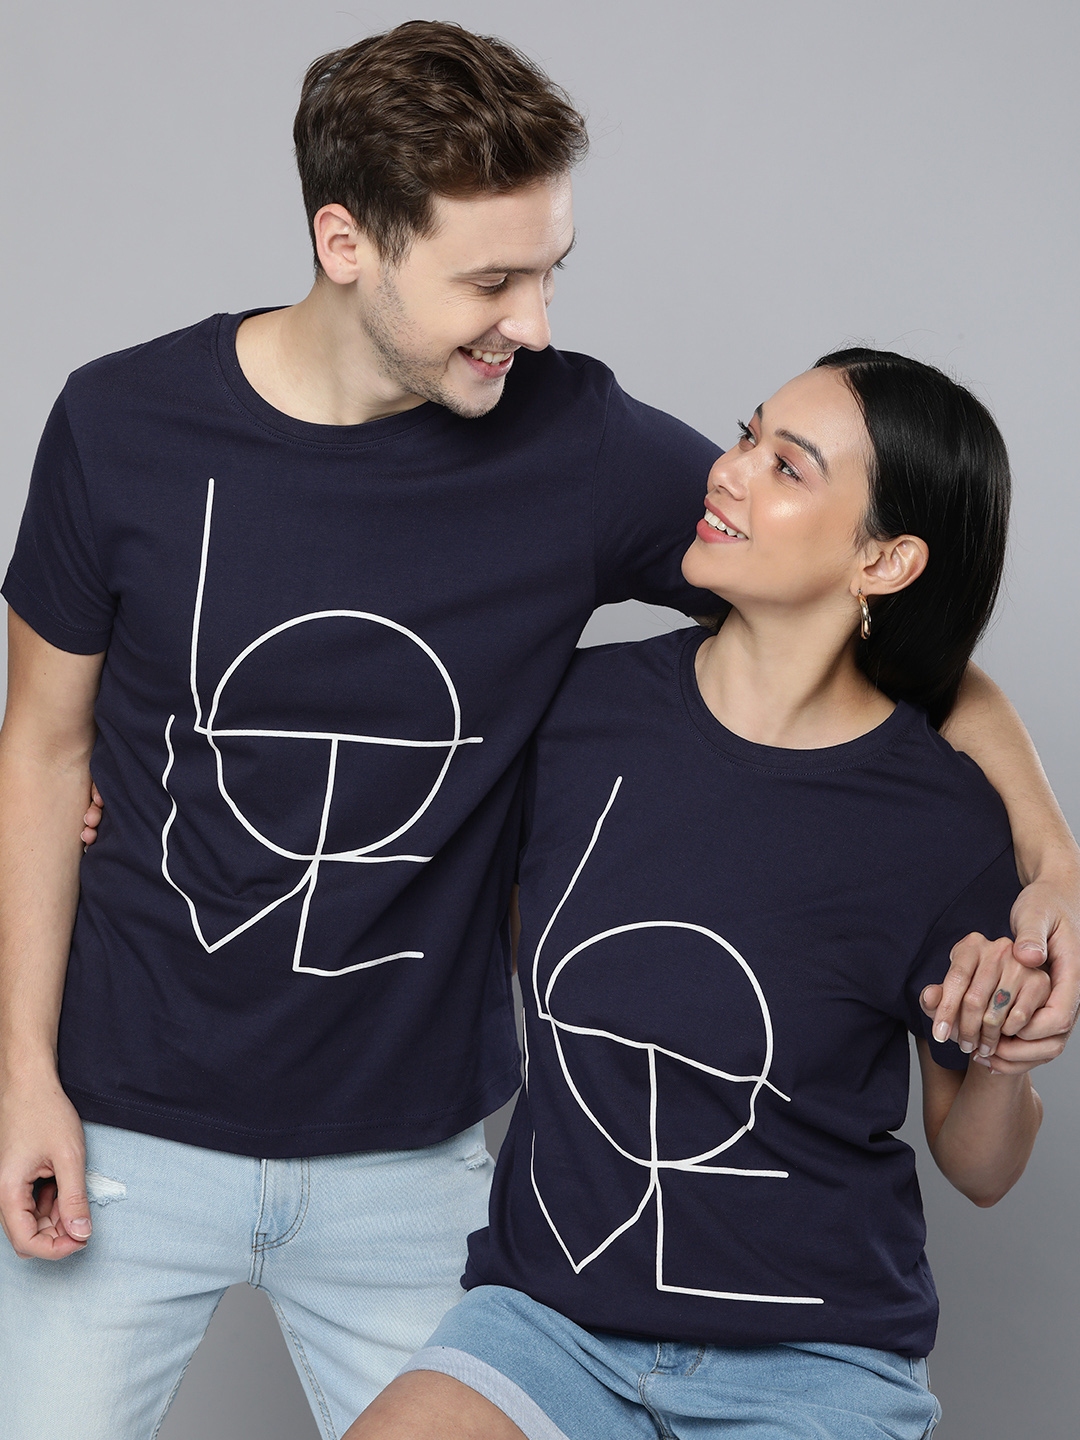 Buy HERE&NOW Unisex Navy Blue Geometrical Printed Casual T Shirt